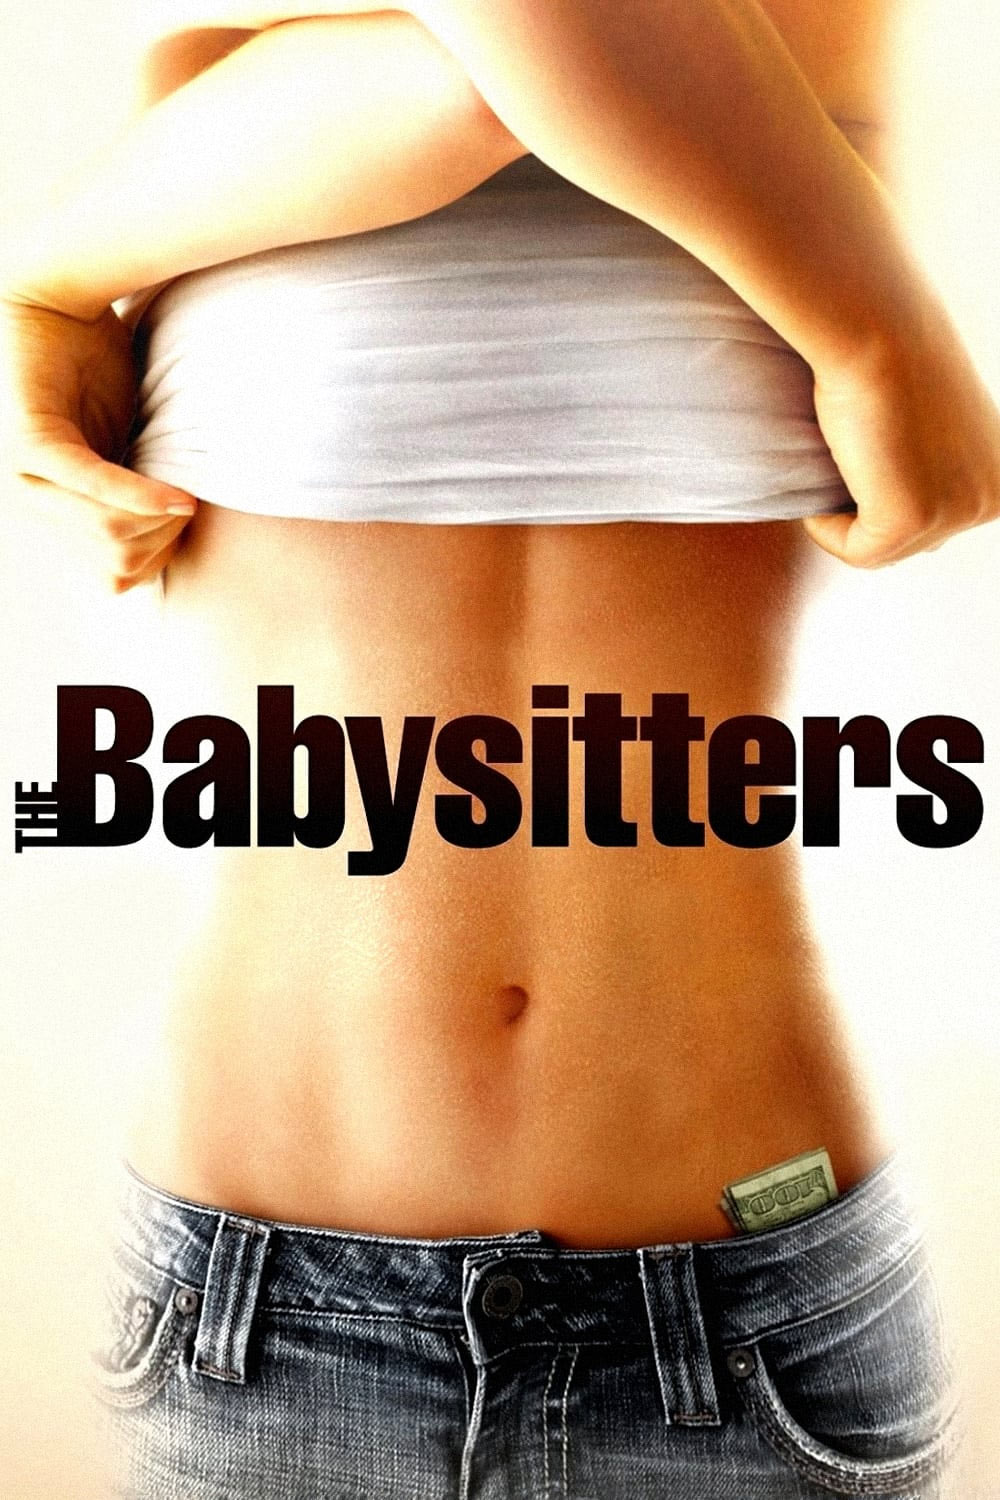 The Babysitters (2007) Poster